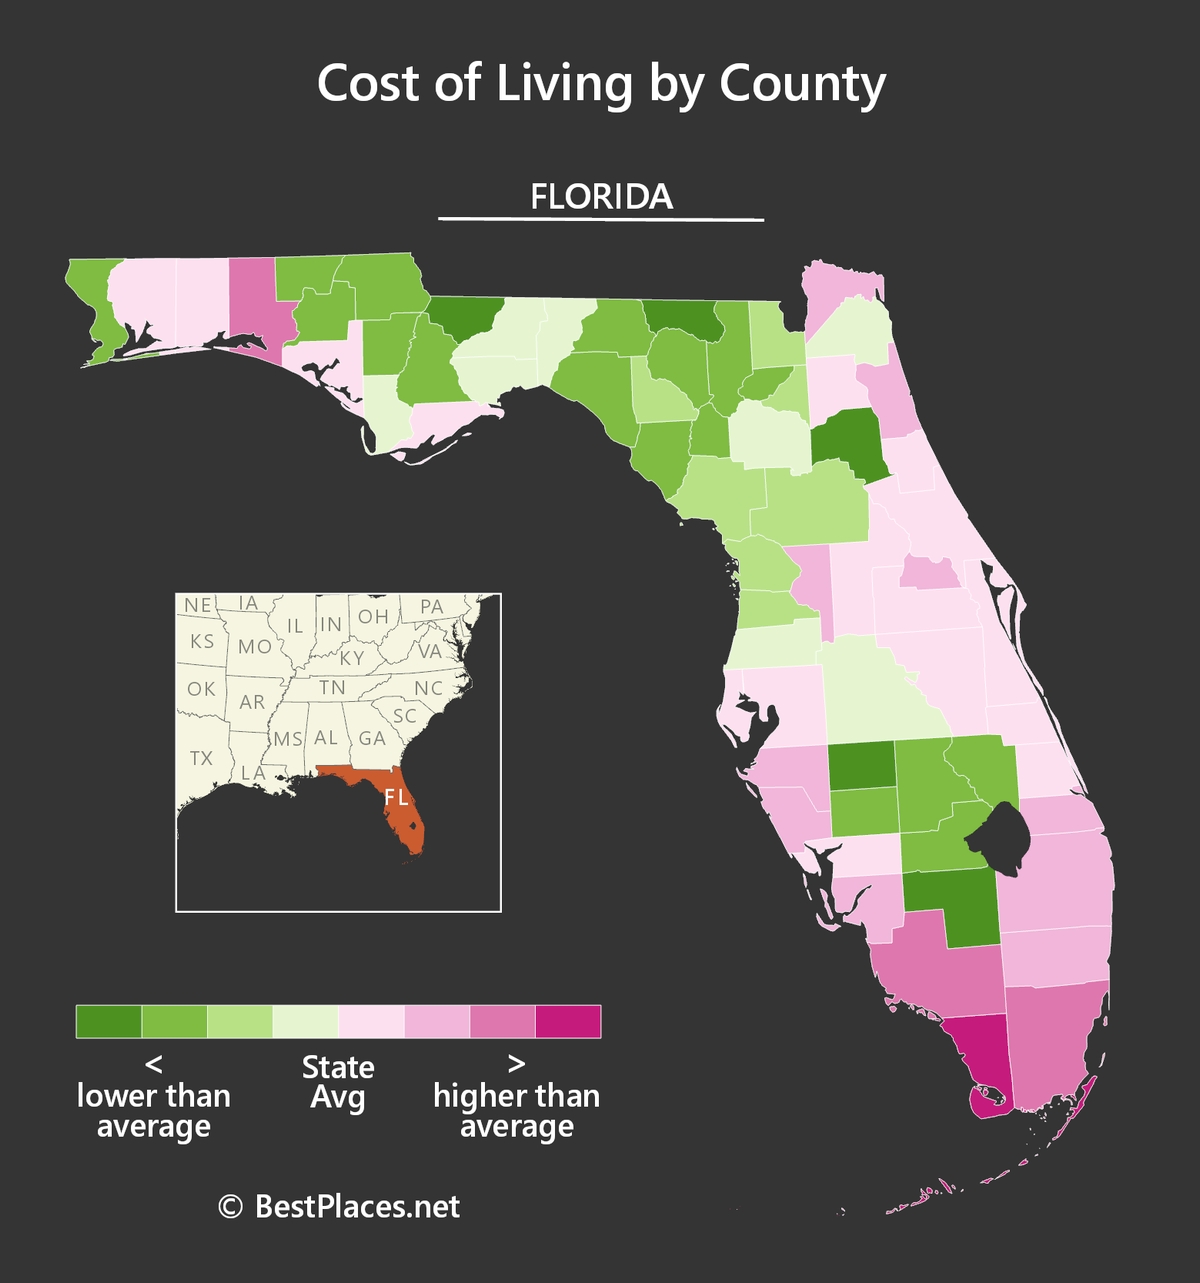 a Florida map showing the cost of living by county